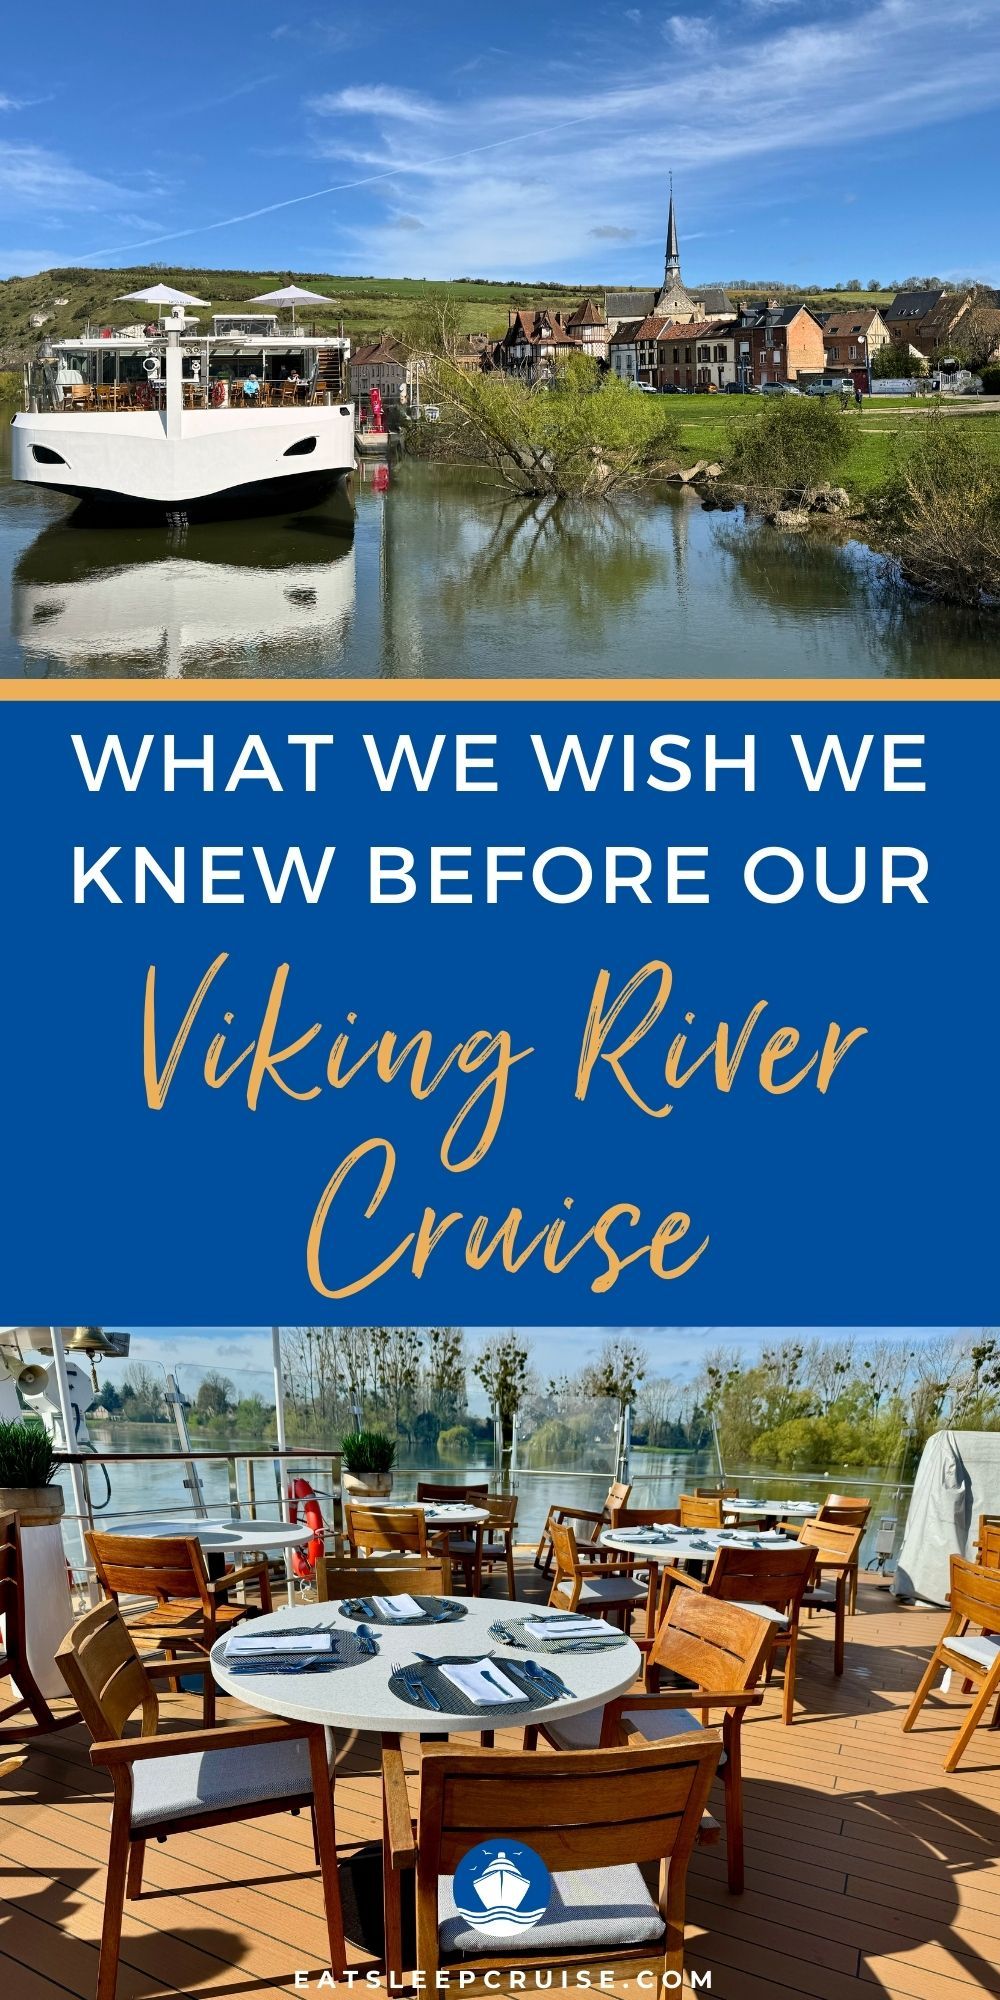 What Wish We Knew Before our First Viking Cruise